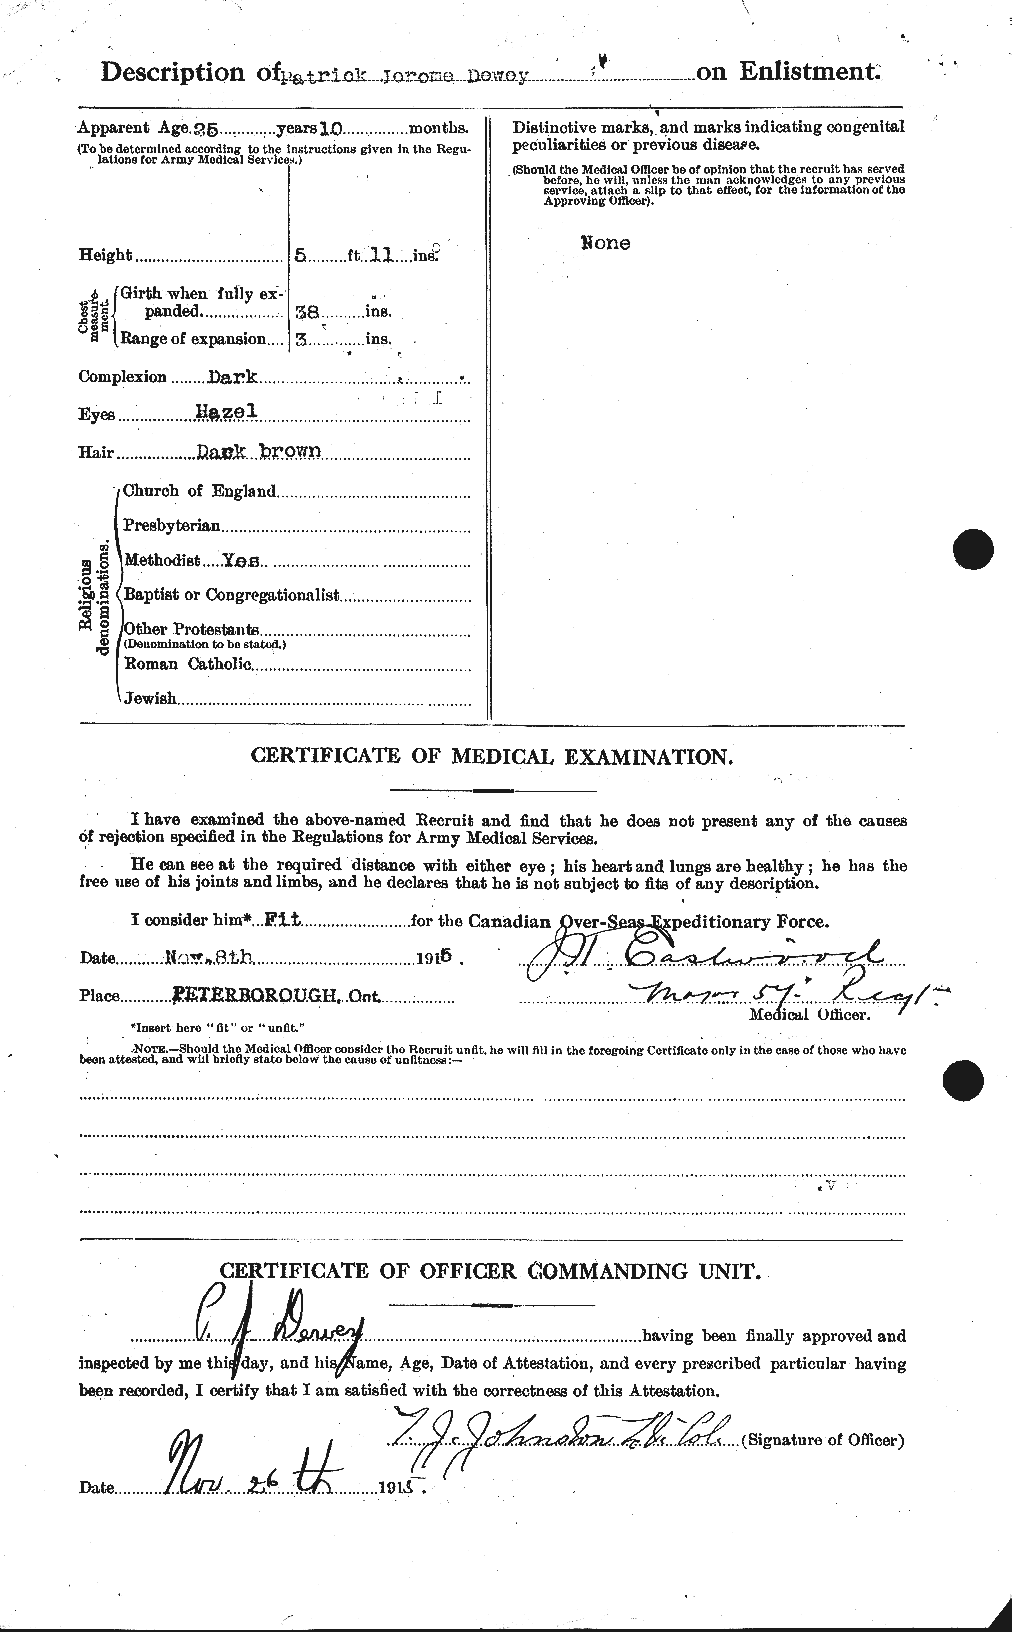 Personnel Records of the First World War - CEF 288746b